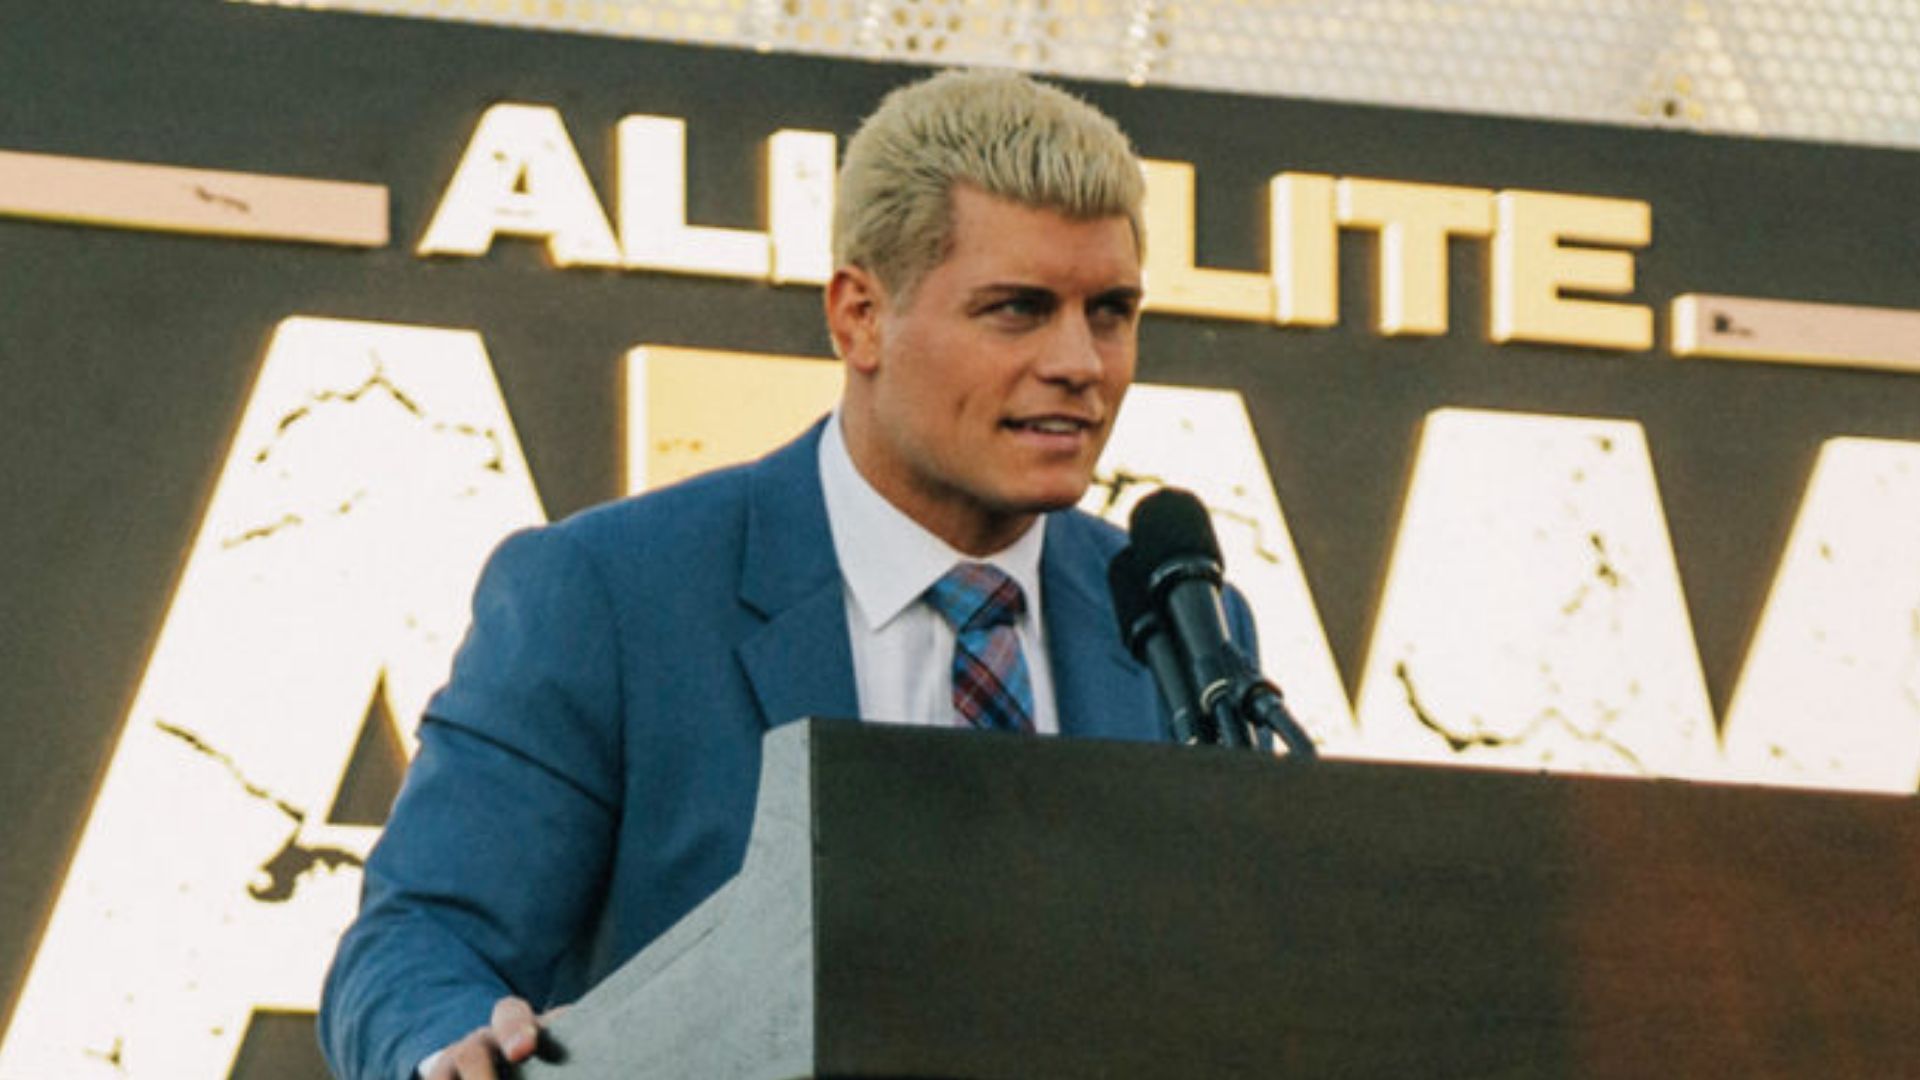 Cody Rhodes recently left his role as an AEW Executive Vice President